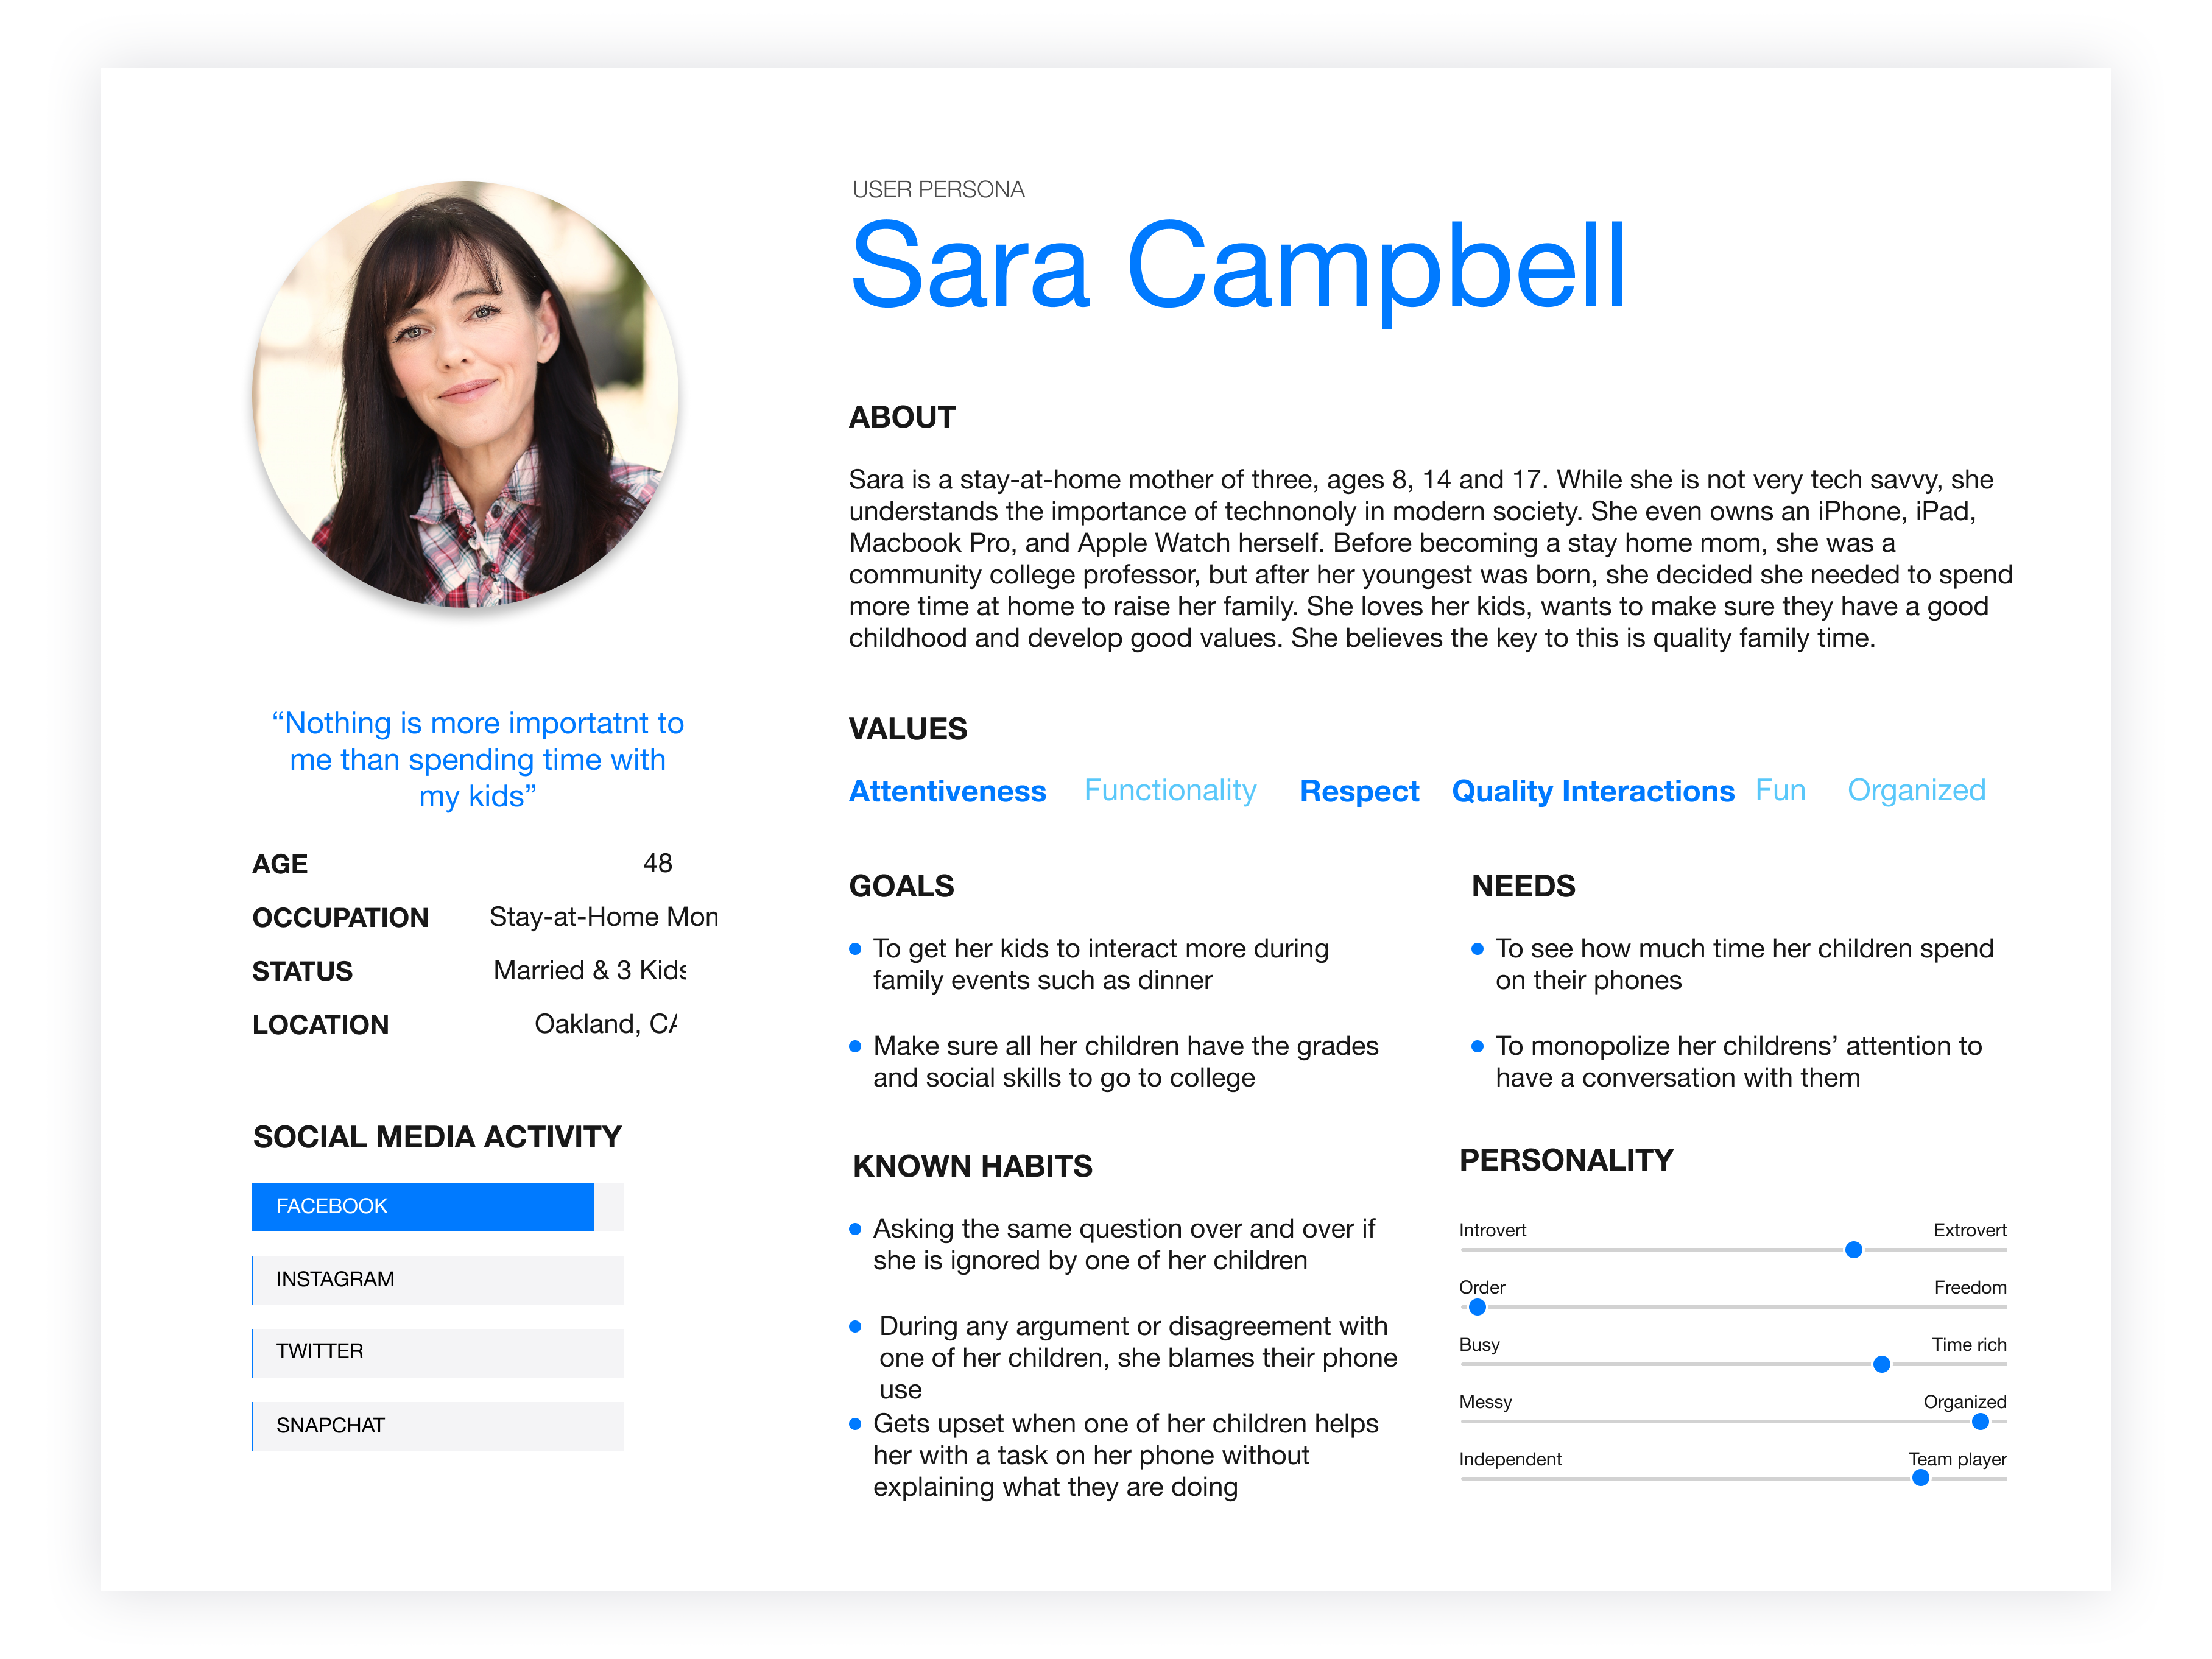 Persona for our user Sara